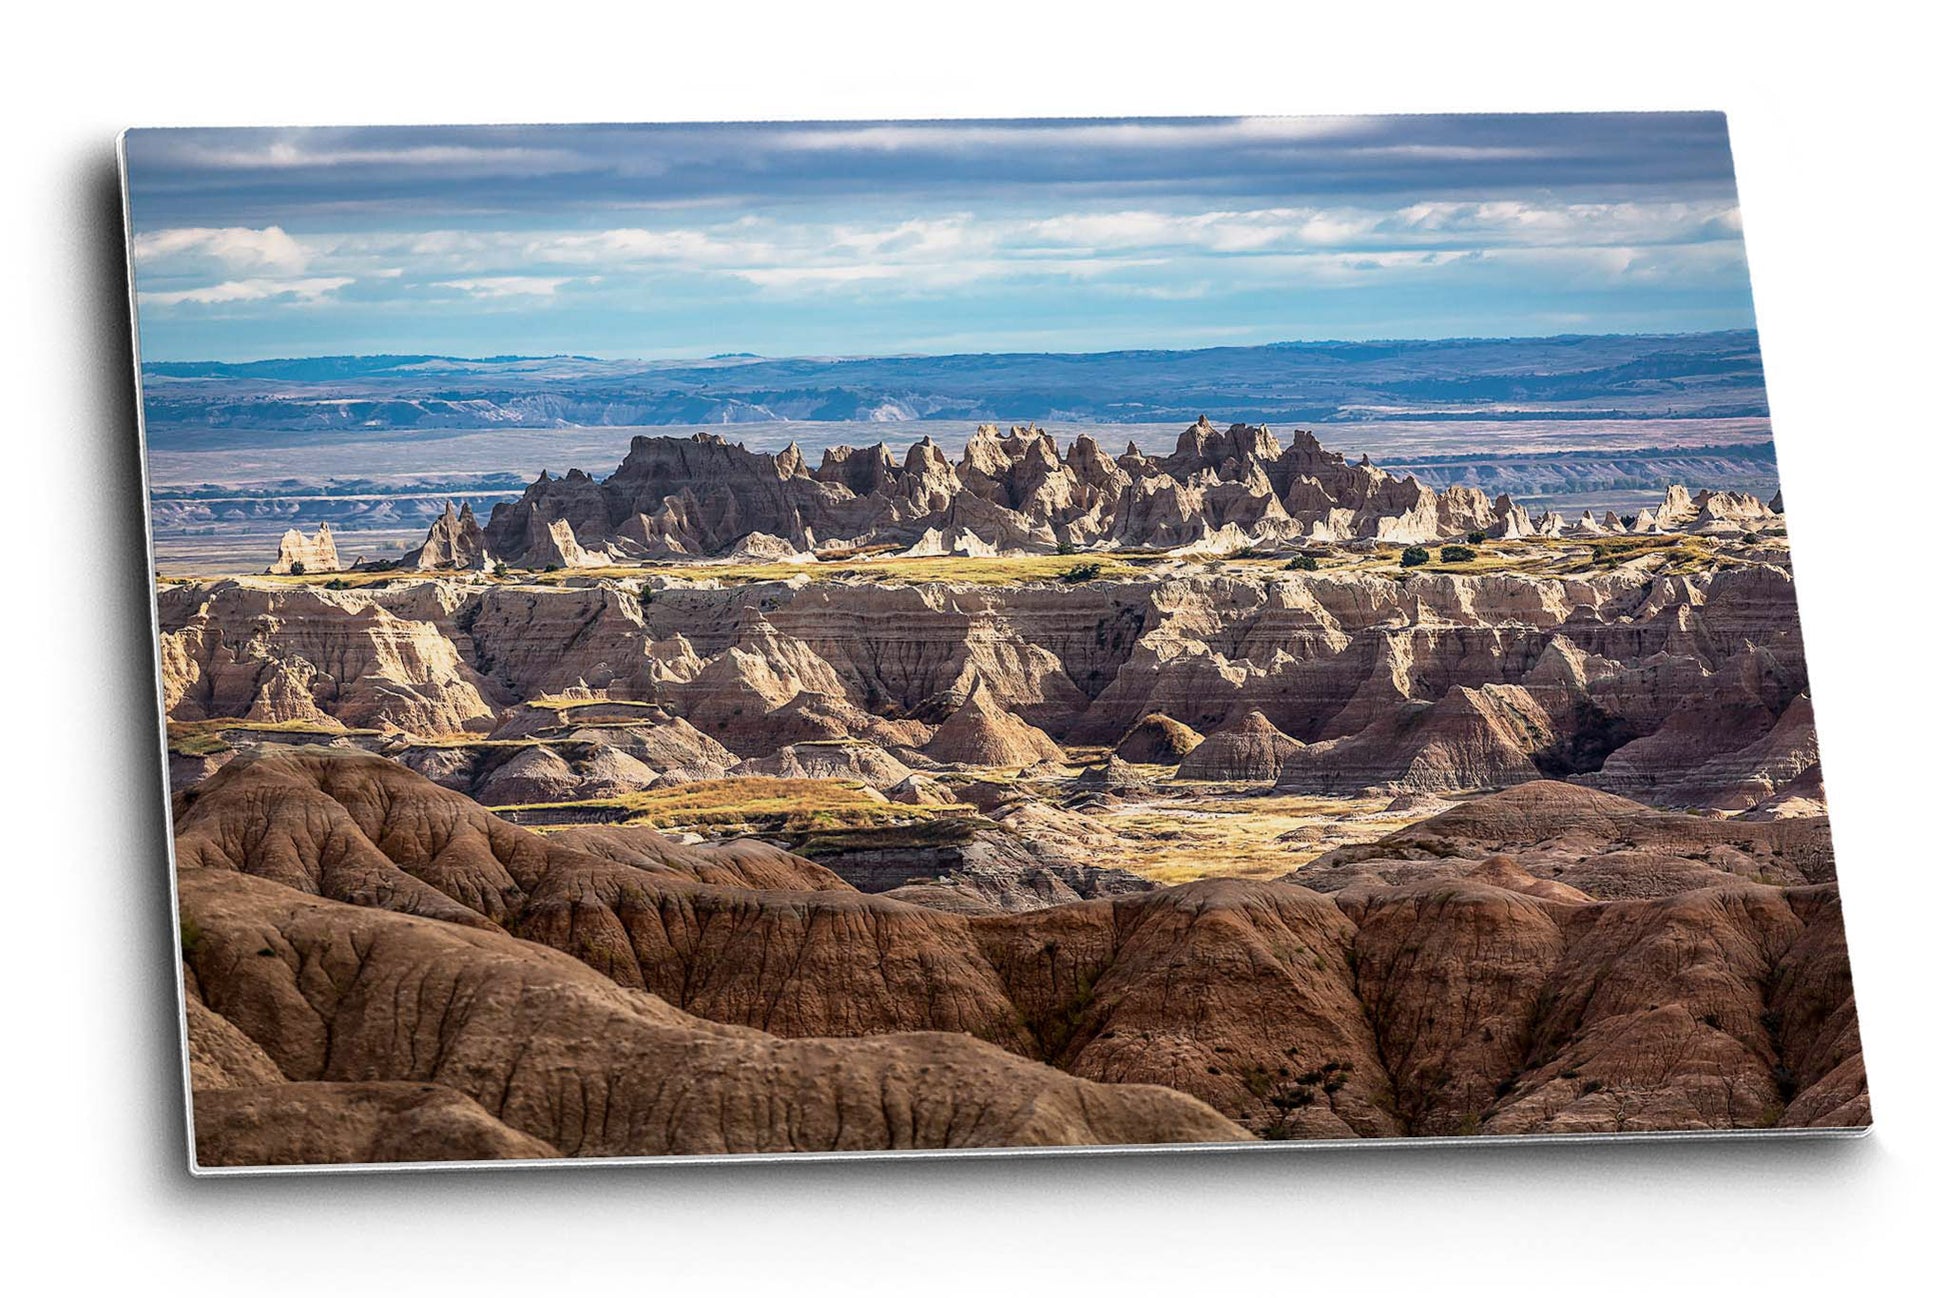 Great plains landscape aluminum metal print of spires rising up from the plains on an autumn day in Badlands National Park, South Dakota by Sean Ramsey of Southern Plains Photography.